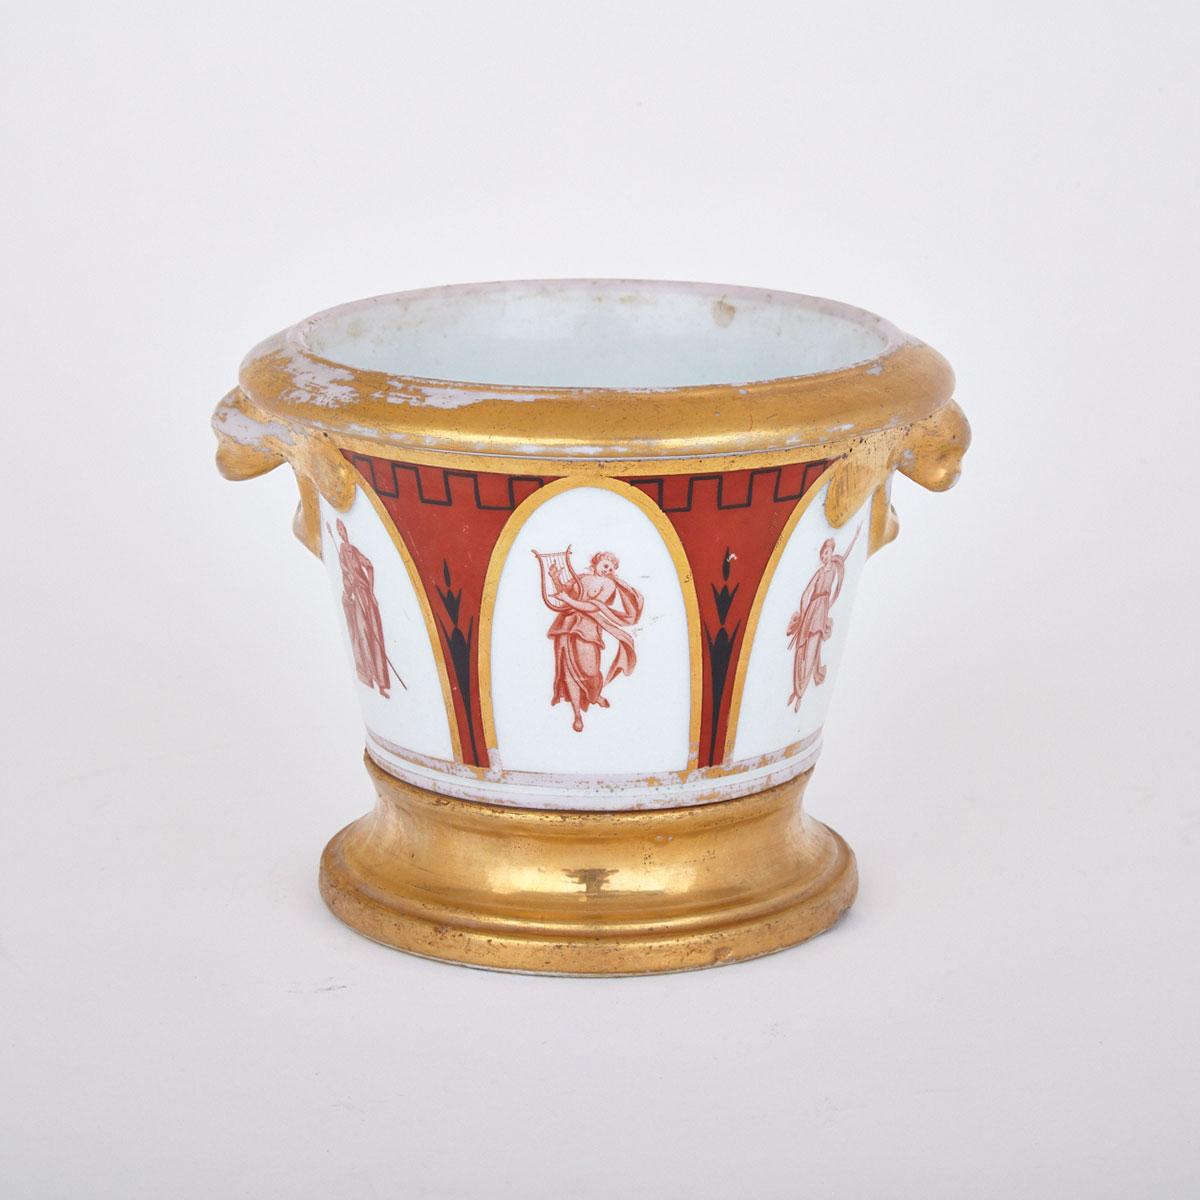 English Porcelain Cachepot and Stand, early19th century